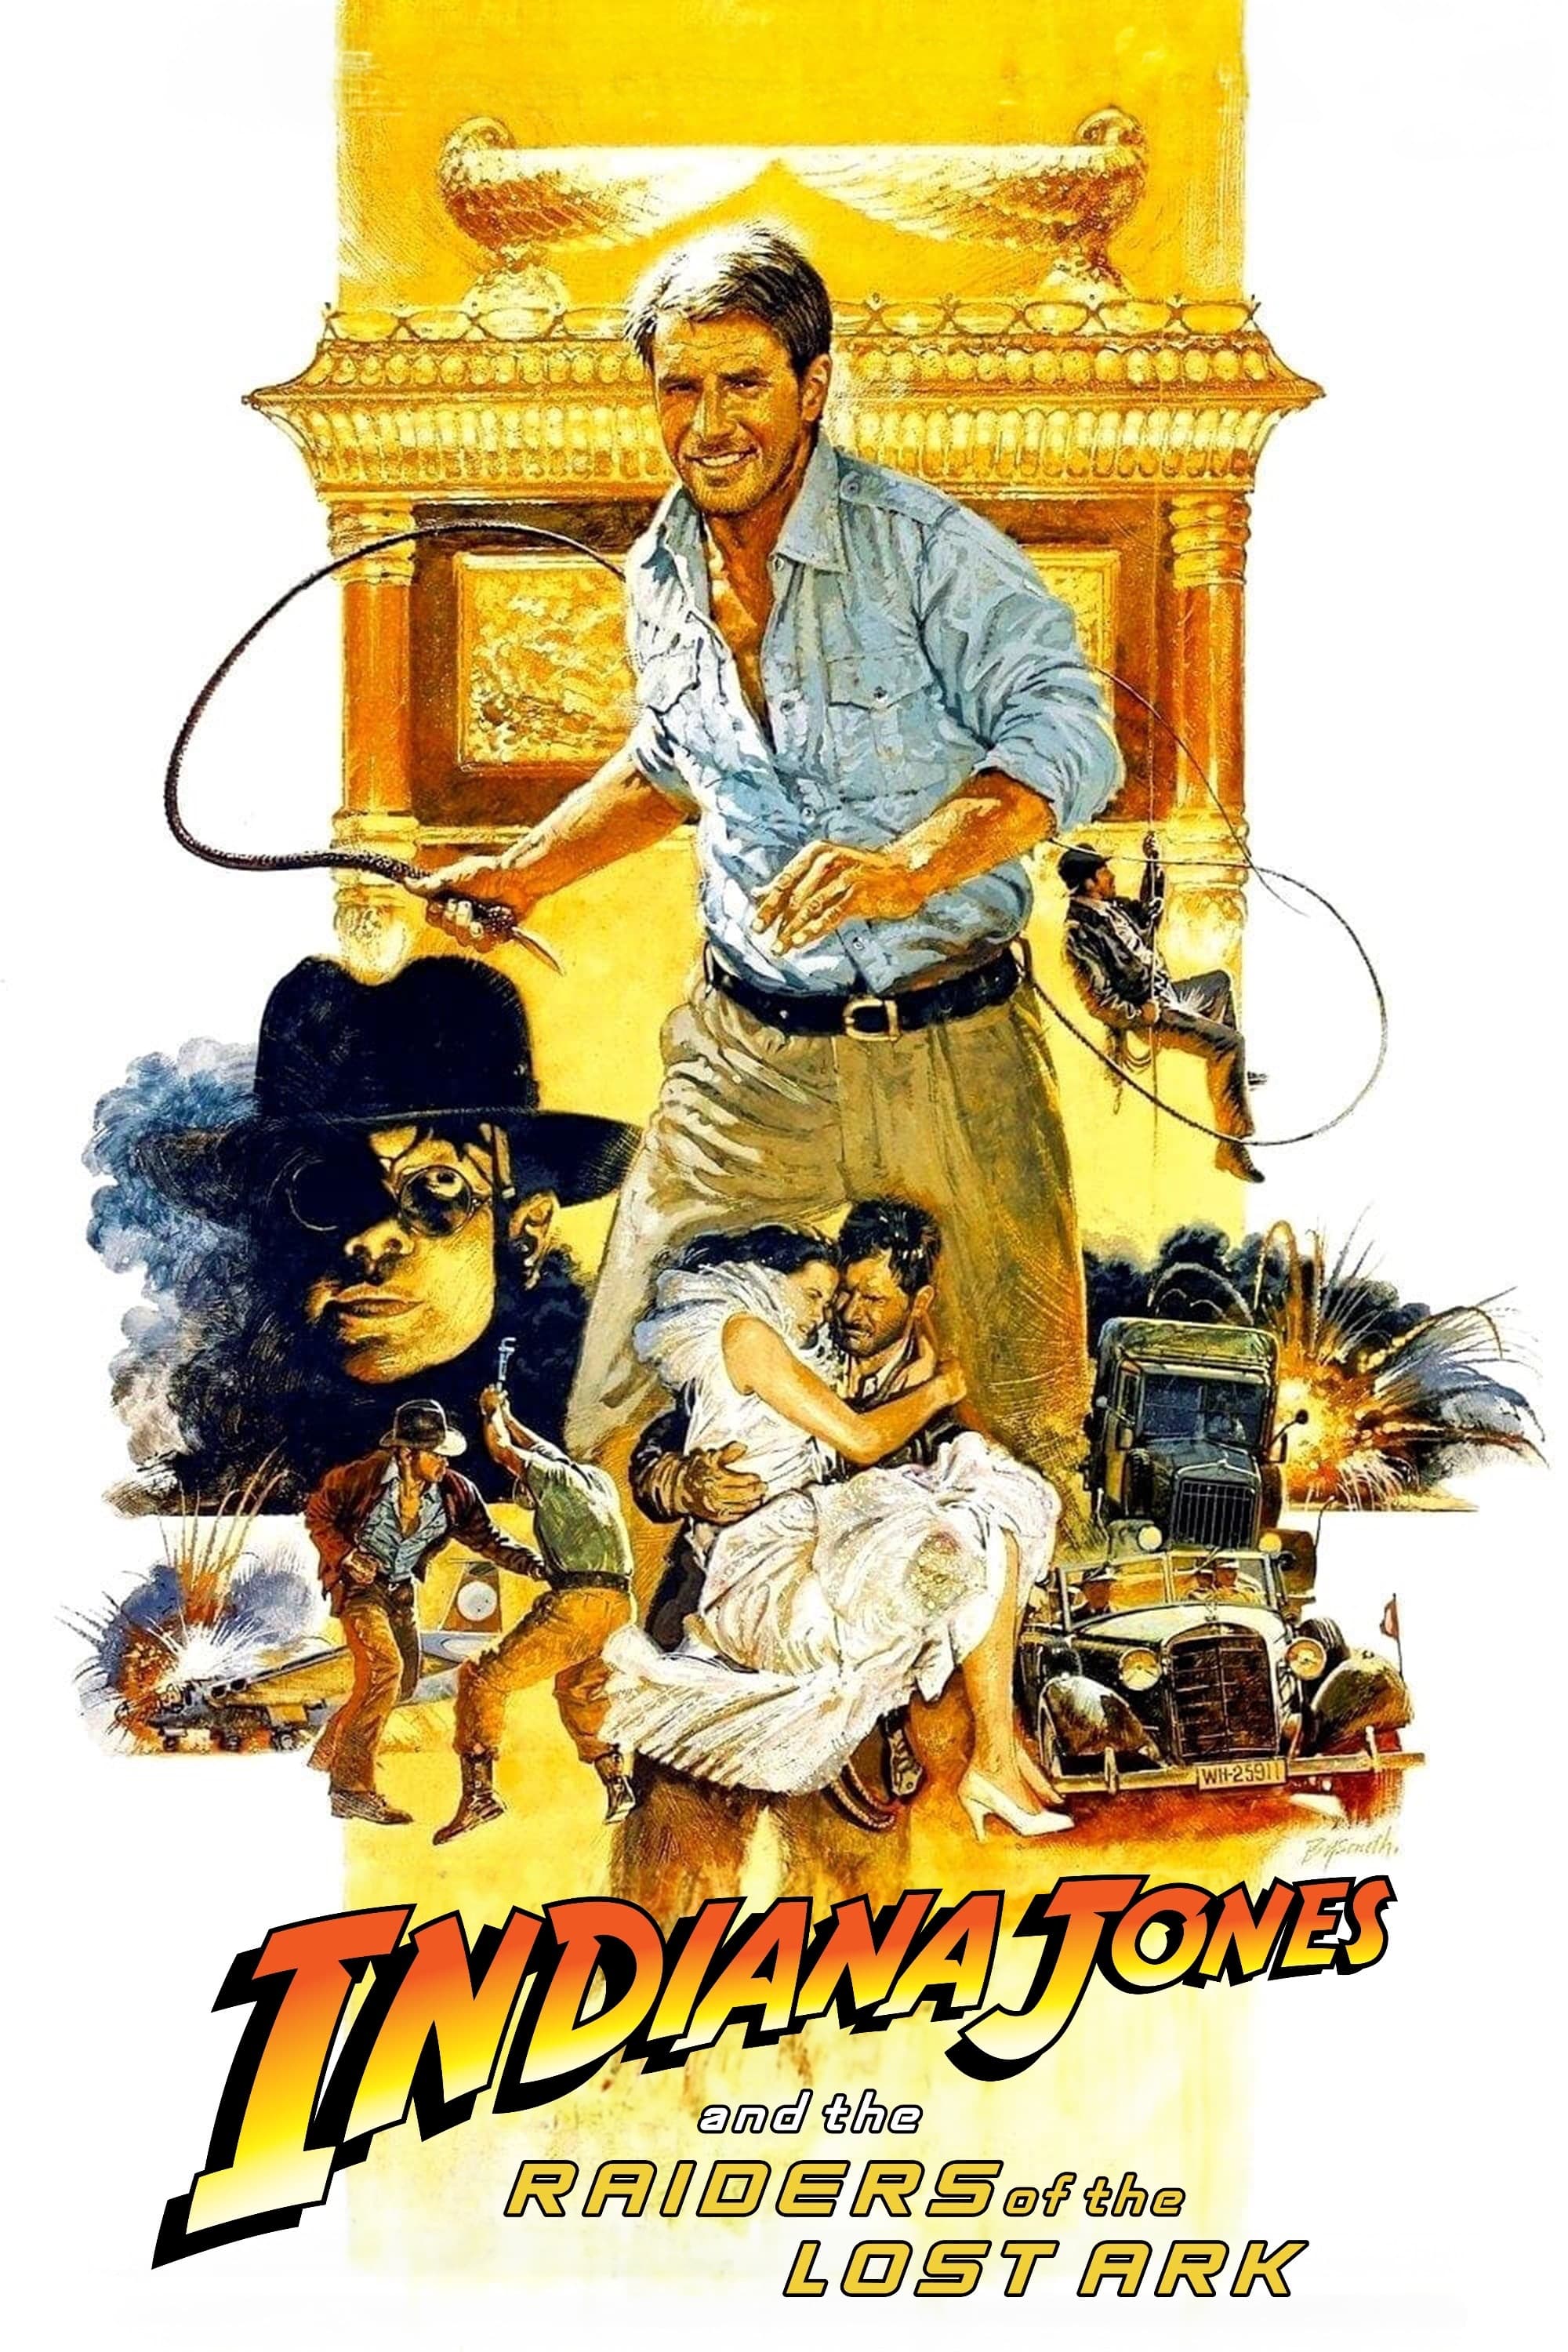 Raiders of the Lost Ark Movie poster